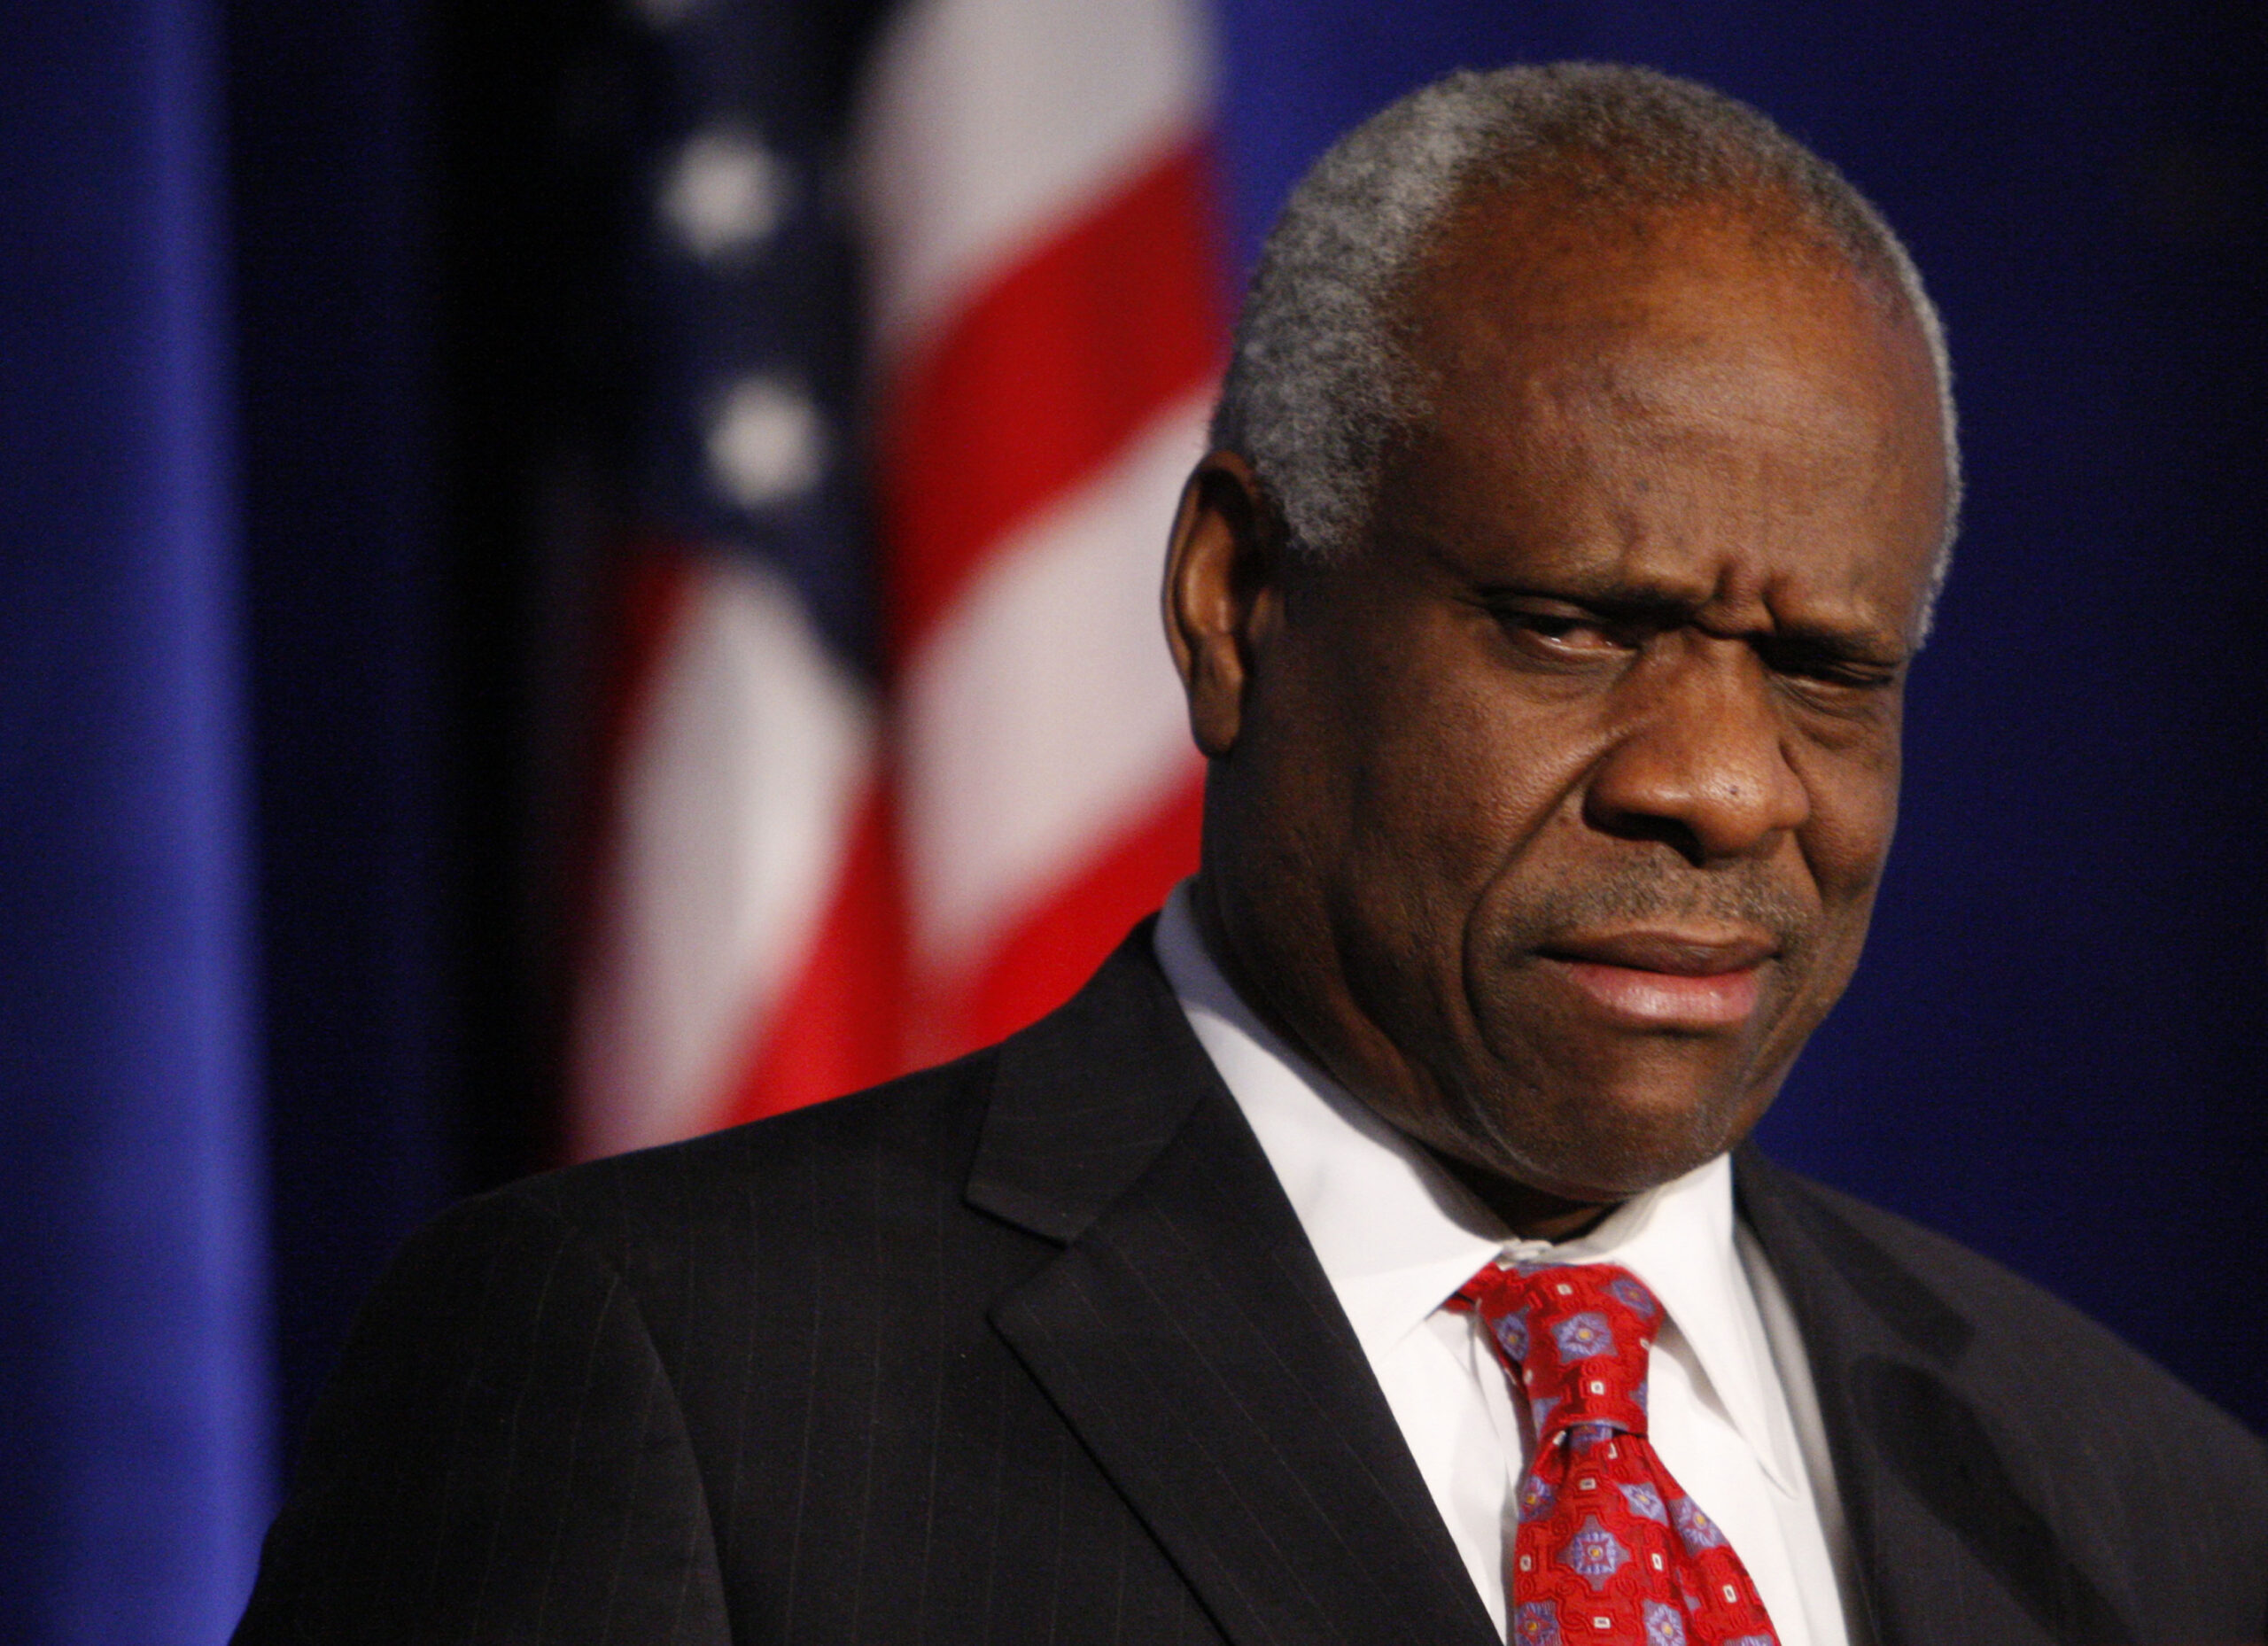 Supreme Court Justice Clarence Thomas has faced scrutiny over undisclosed luxury trips and gifts from billionaire Harlan Crow, sparking ethical concerns and calls for reform. Photo: Charles Dharapak/AP